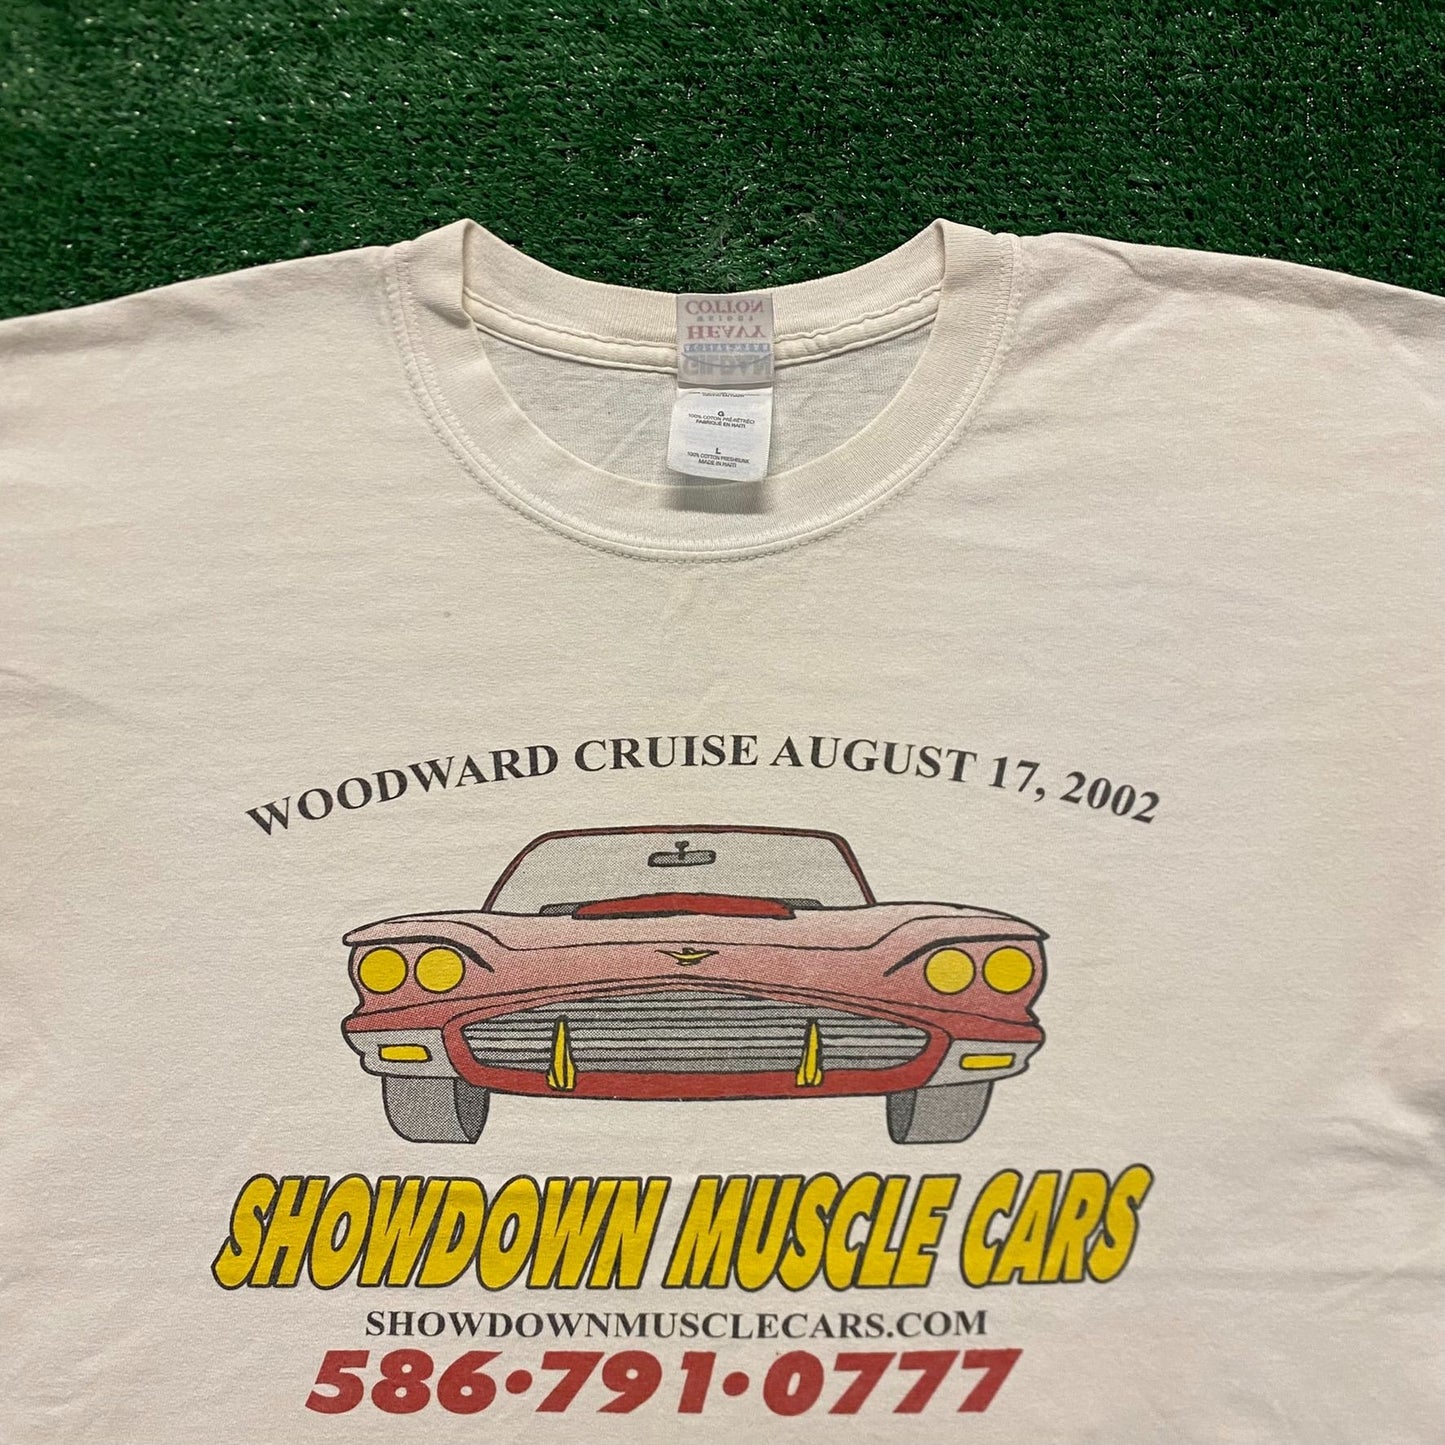 Muscle Cars Vintage 90s Racing T-Shirt